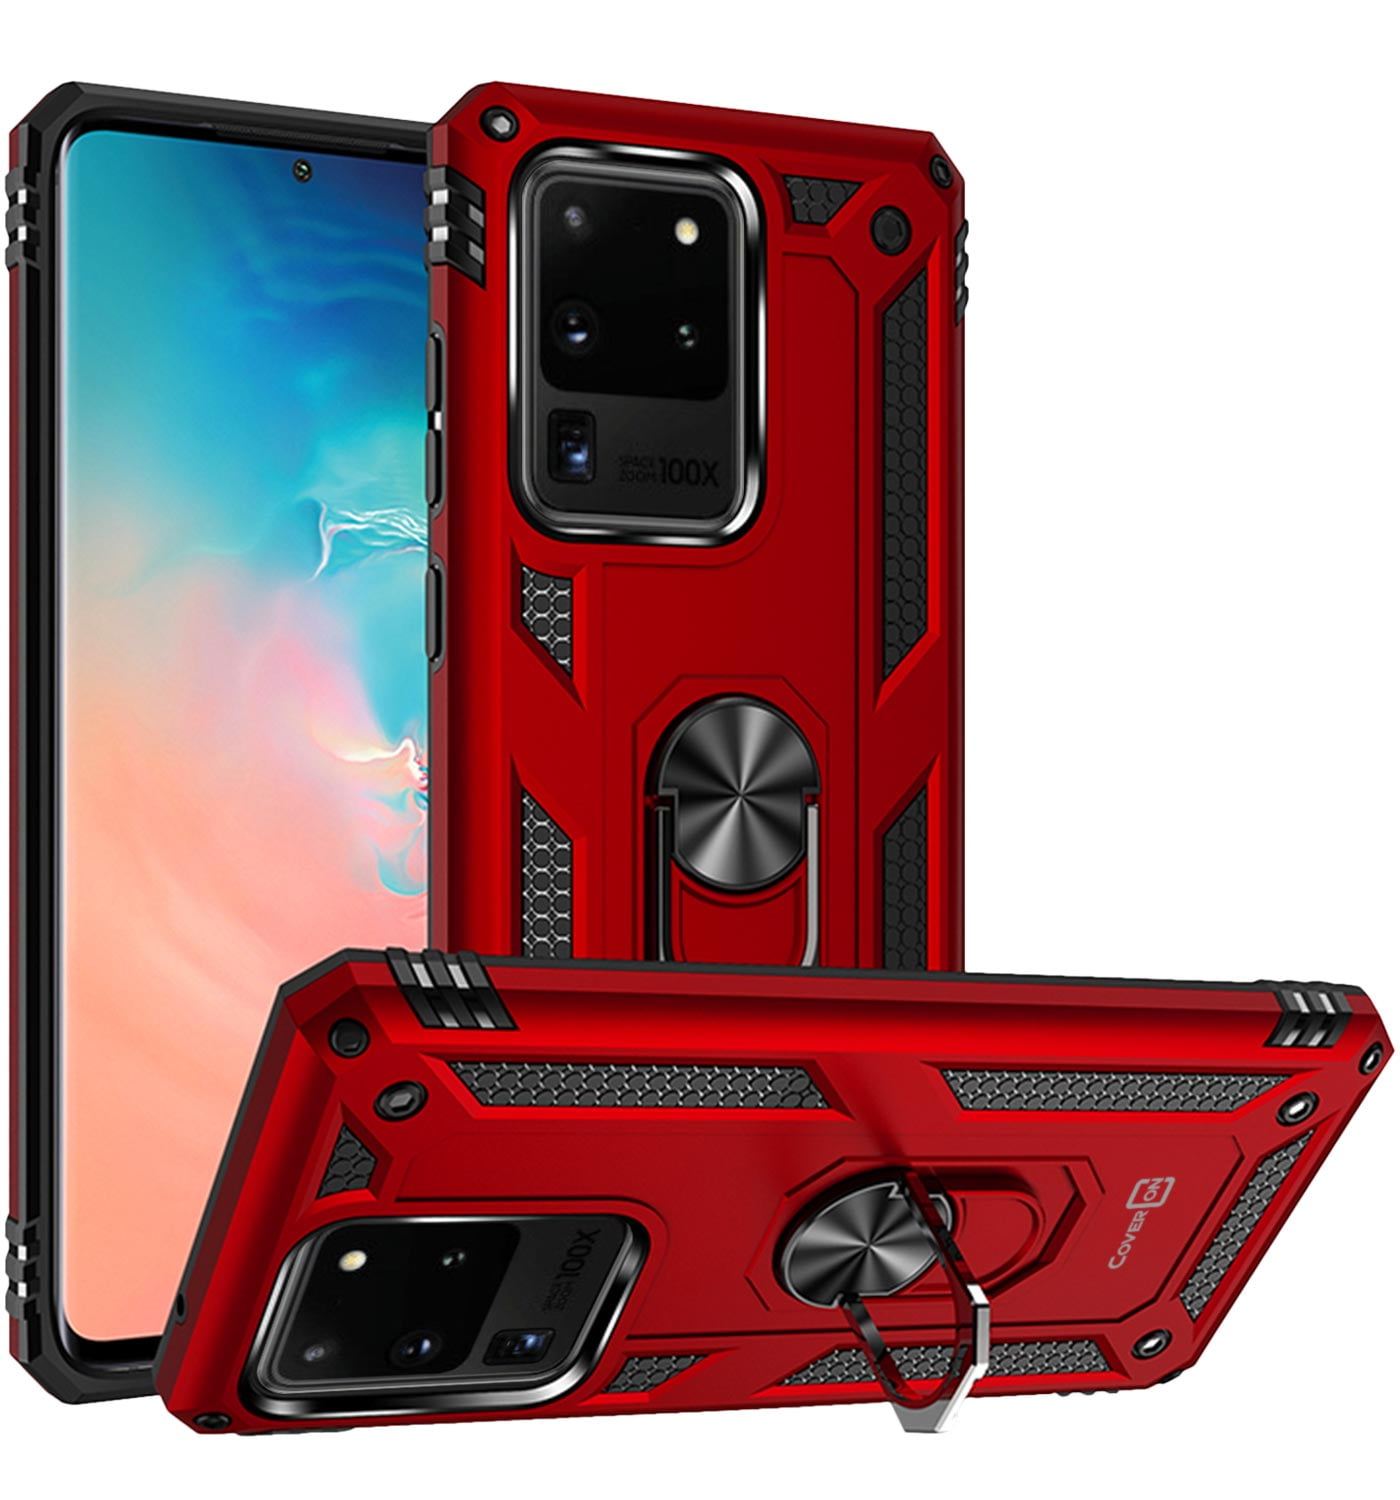 Case Apply for Samsung Galaxy J8 Case with Ring Kickstand Silicone case Magnetic Car Mount case for Galaxy J8